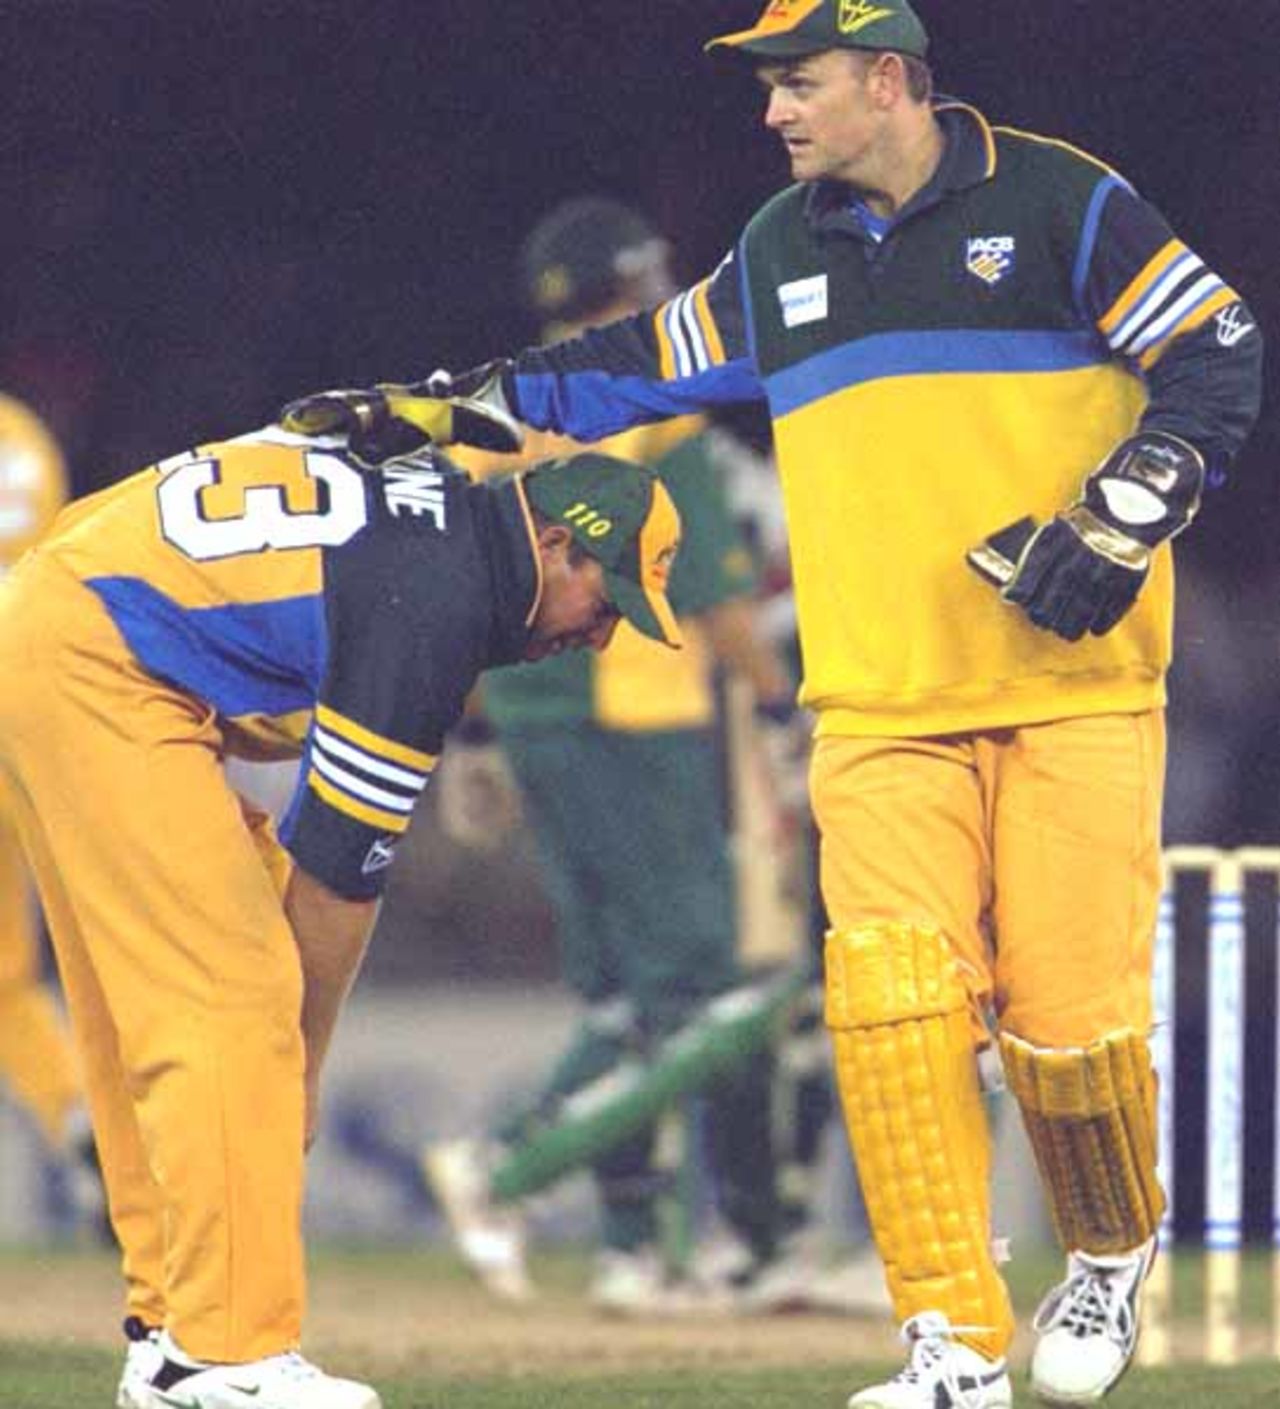 16 Aug 2000: Adam Gilchrist (right) of Australia encourages team mate Shane Warne, in the match between Australia and South Africa, in game one of the Super Challenge 2000, played at Colonial Stadium in Melbourne, Australia. This is the first game of cricket to be played indoors.